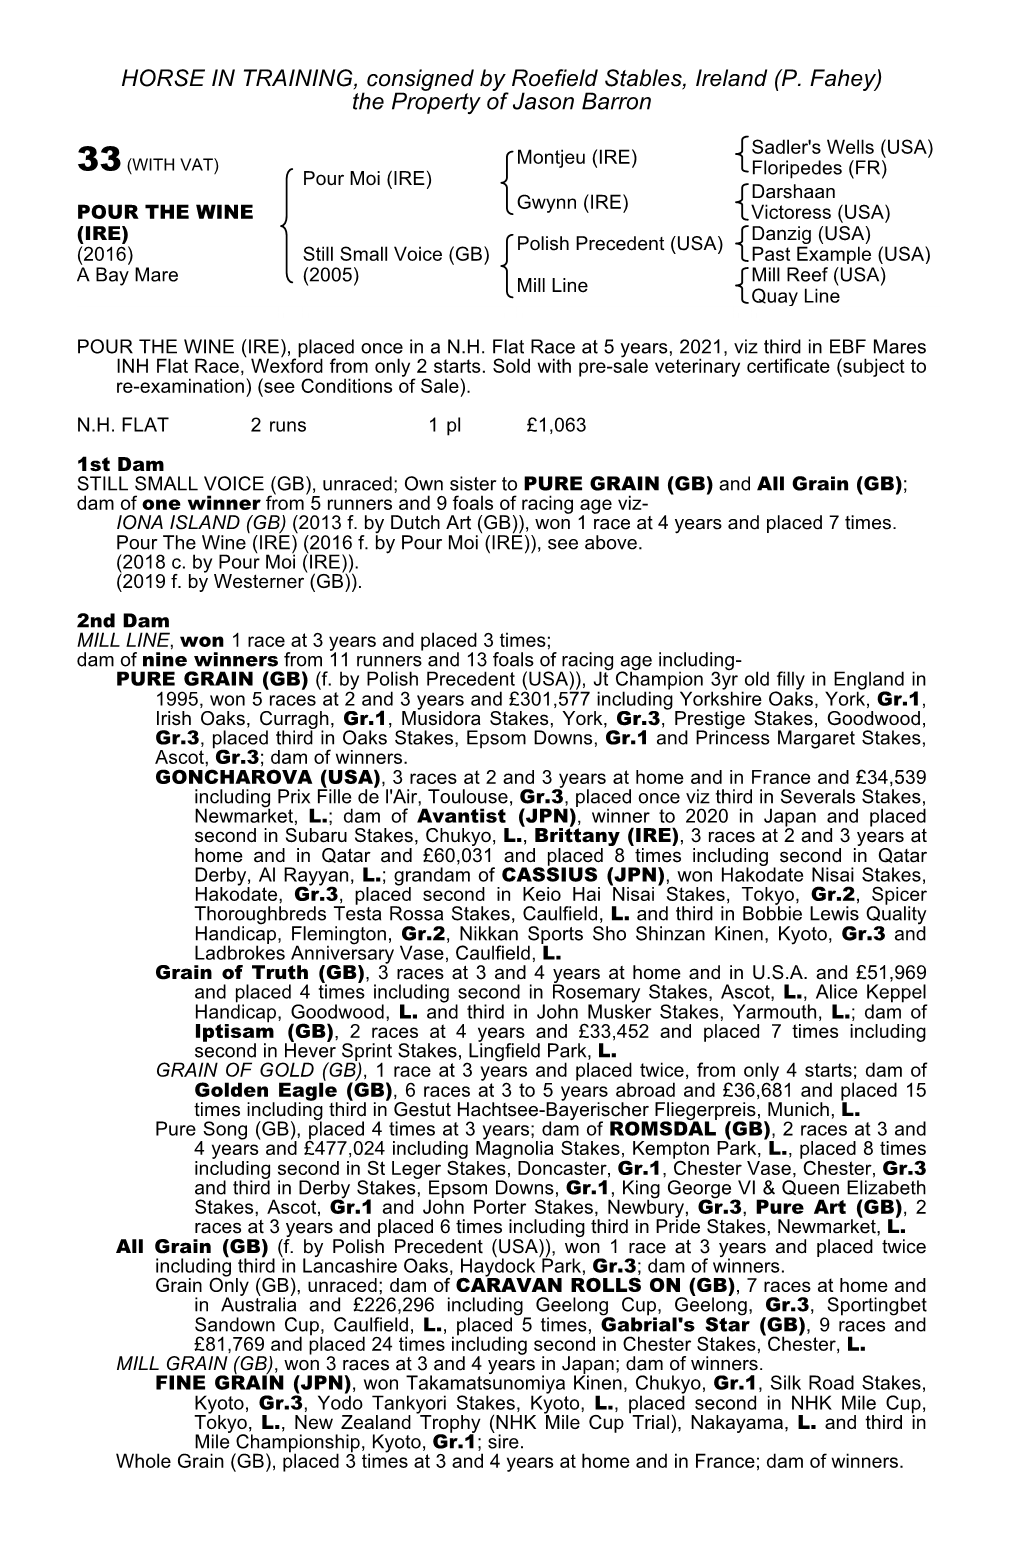 HORSE in TRAINING, Consigned by Roefield Stables, Ireland (P. Fahey) the Property of Jason Barron